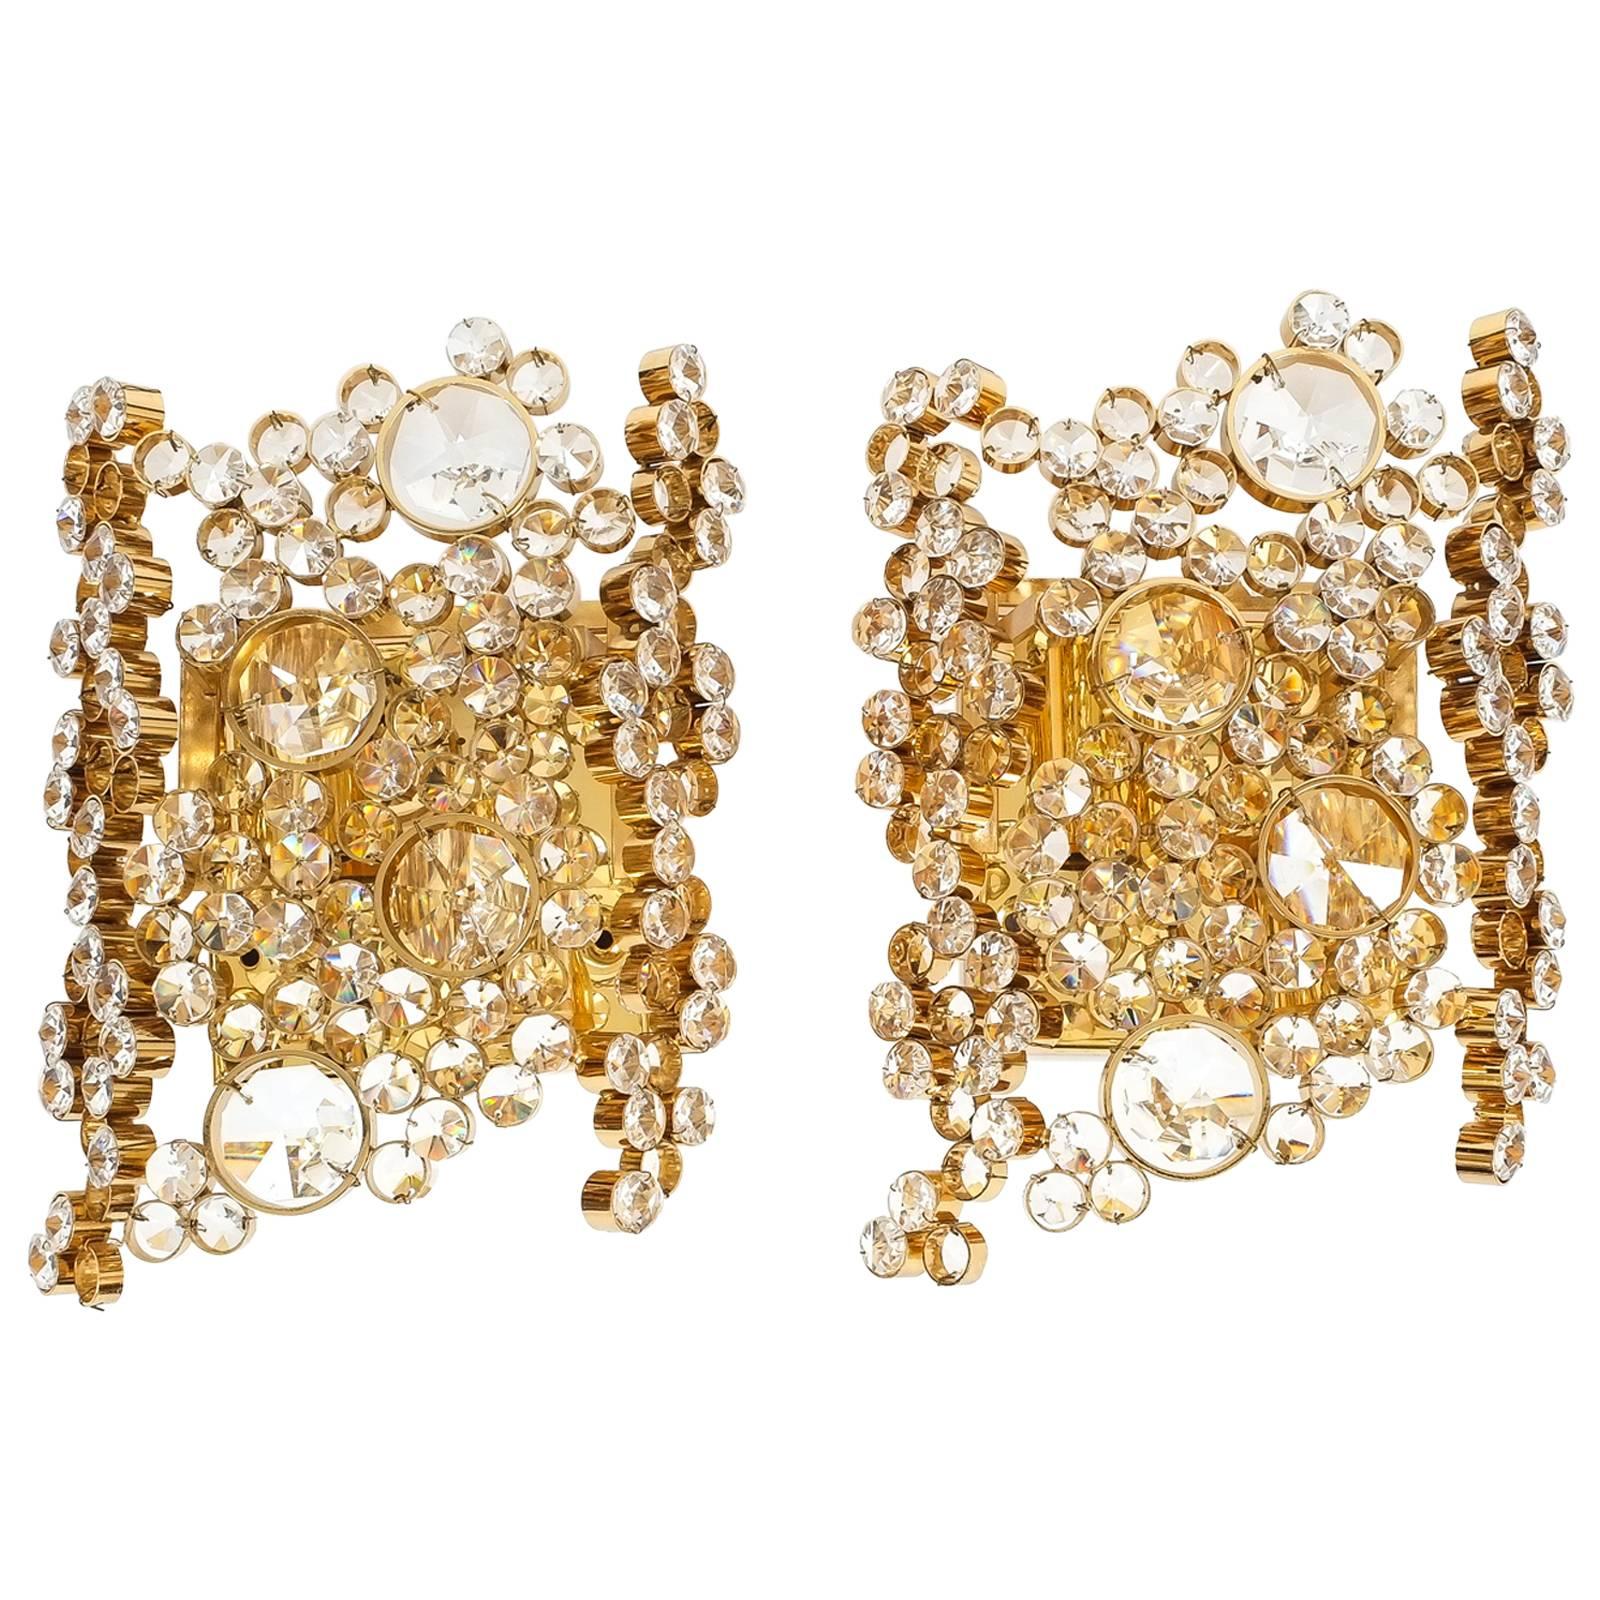 Pair of Gilt Brass and Crystal Glass Encrusted Sconces by Palwa